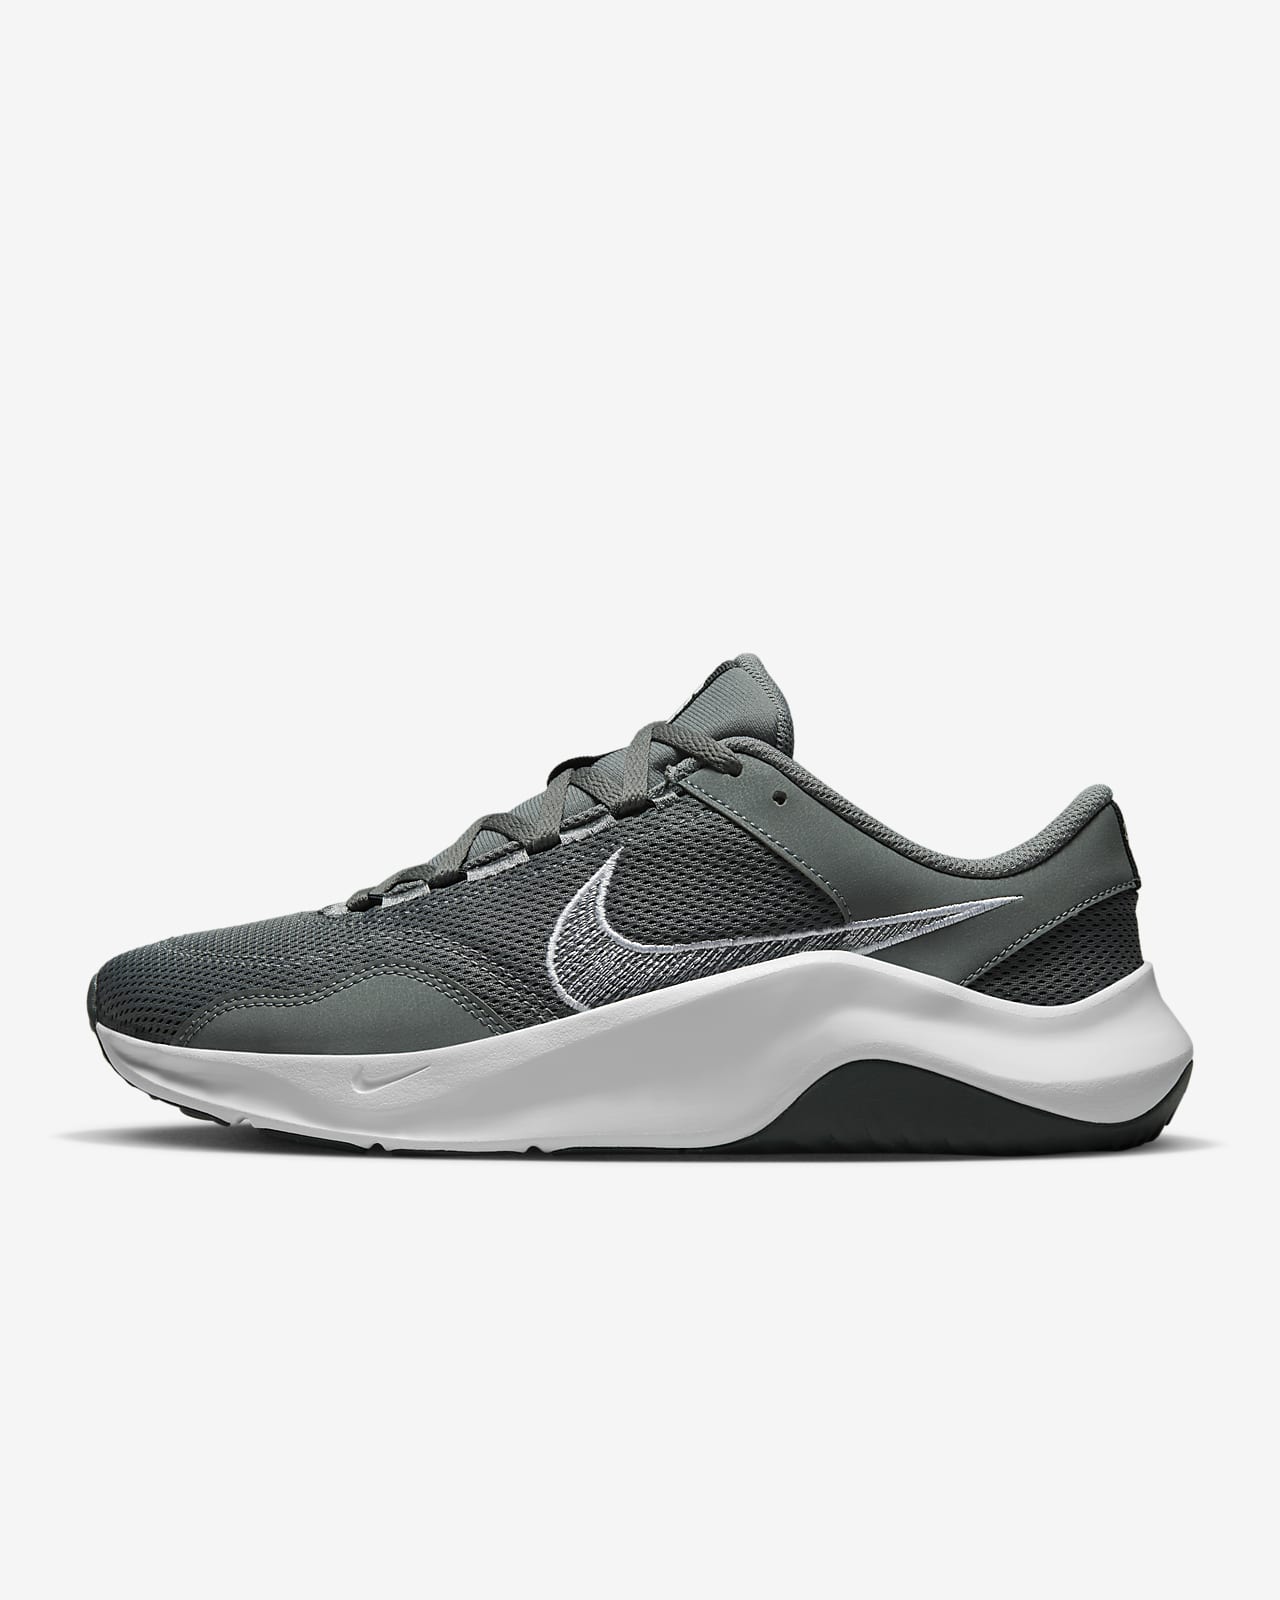 Thank you for your help broken Annotate Nike Legend Essential 3 Next Nature Men's Training Shoes. Nike.com